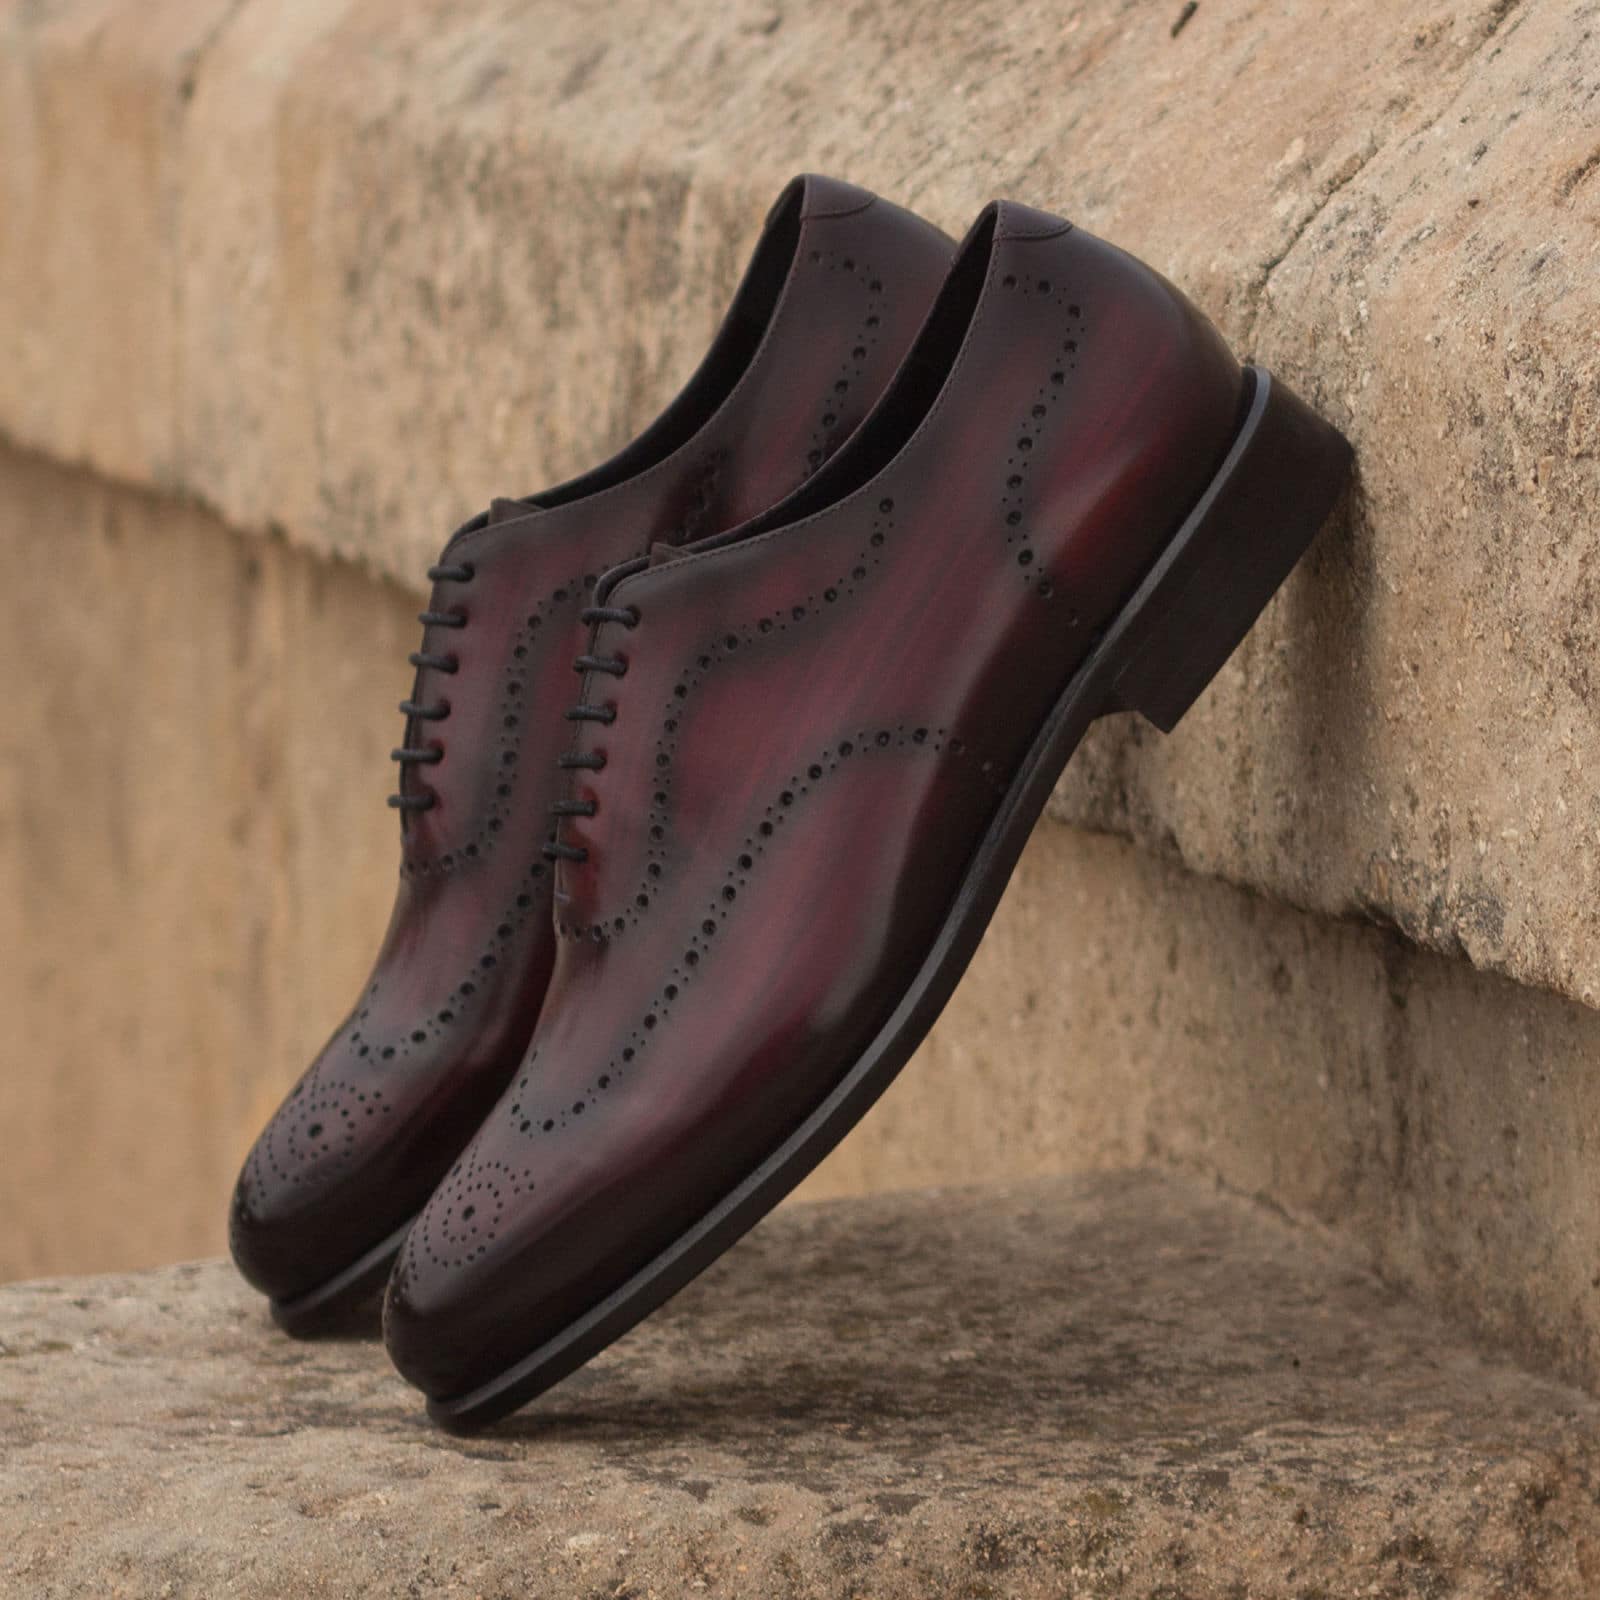 Burgundy Cherry Red Patina Finish Leather Formal Oxford Wingtip Wholecut Brogue Lace Up Shoes for Men with Leather Sole. Goodyear Welted Construction Available.